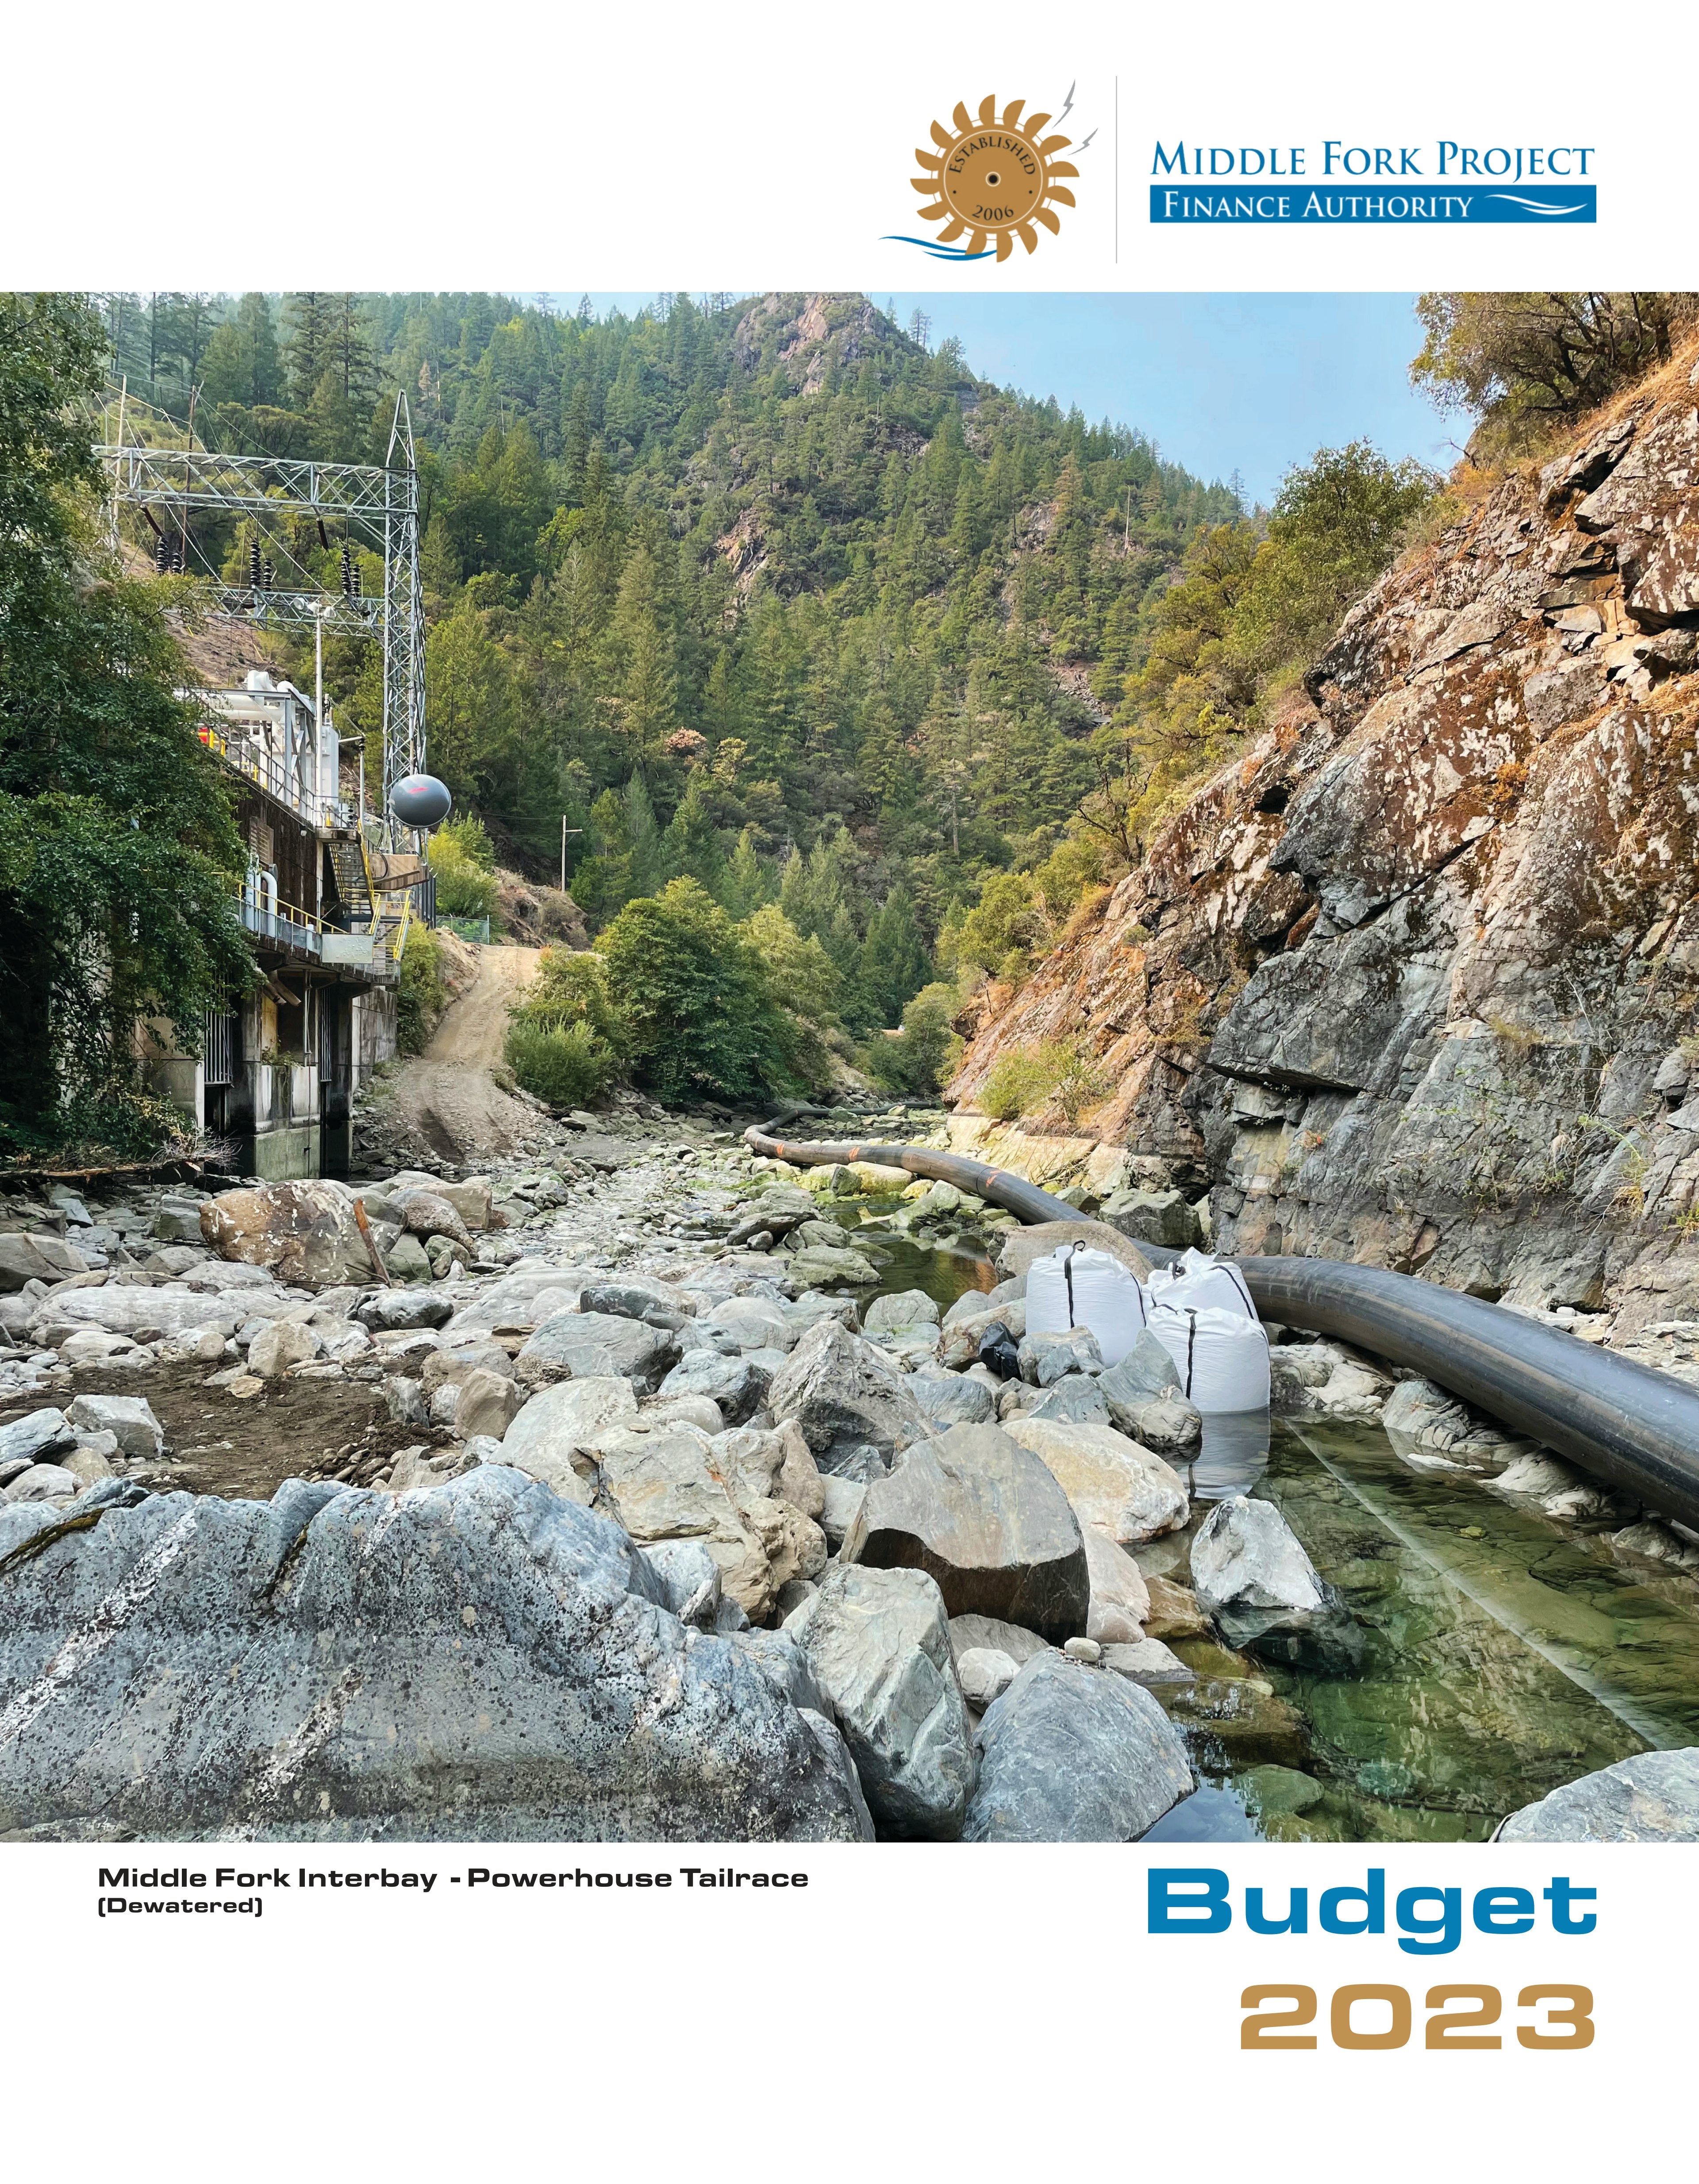 Annual Report Thumbnail and link for 2023 Budget pdf